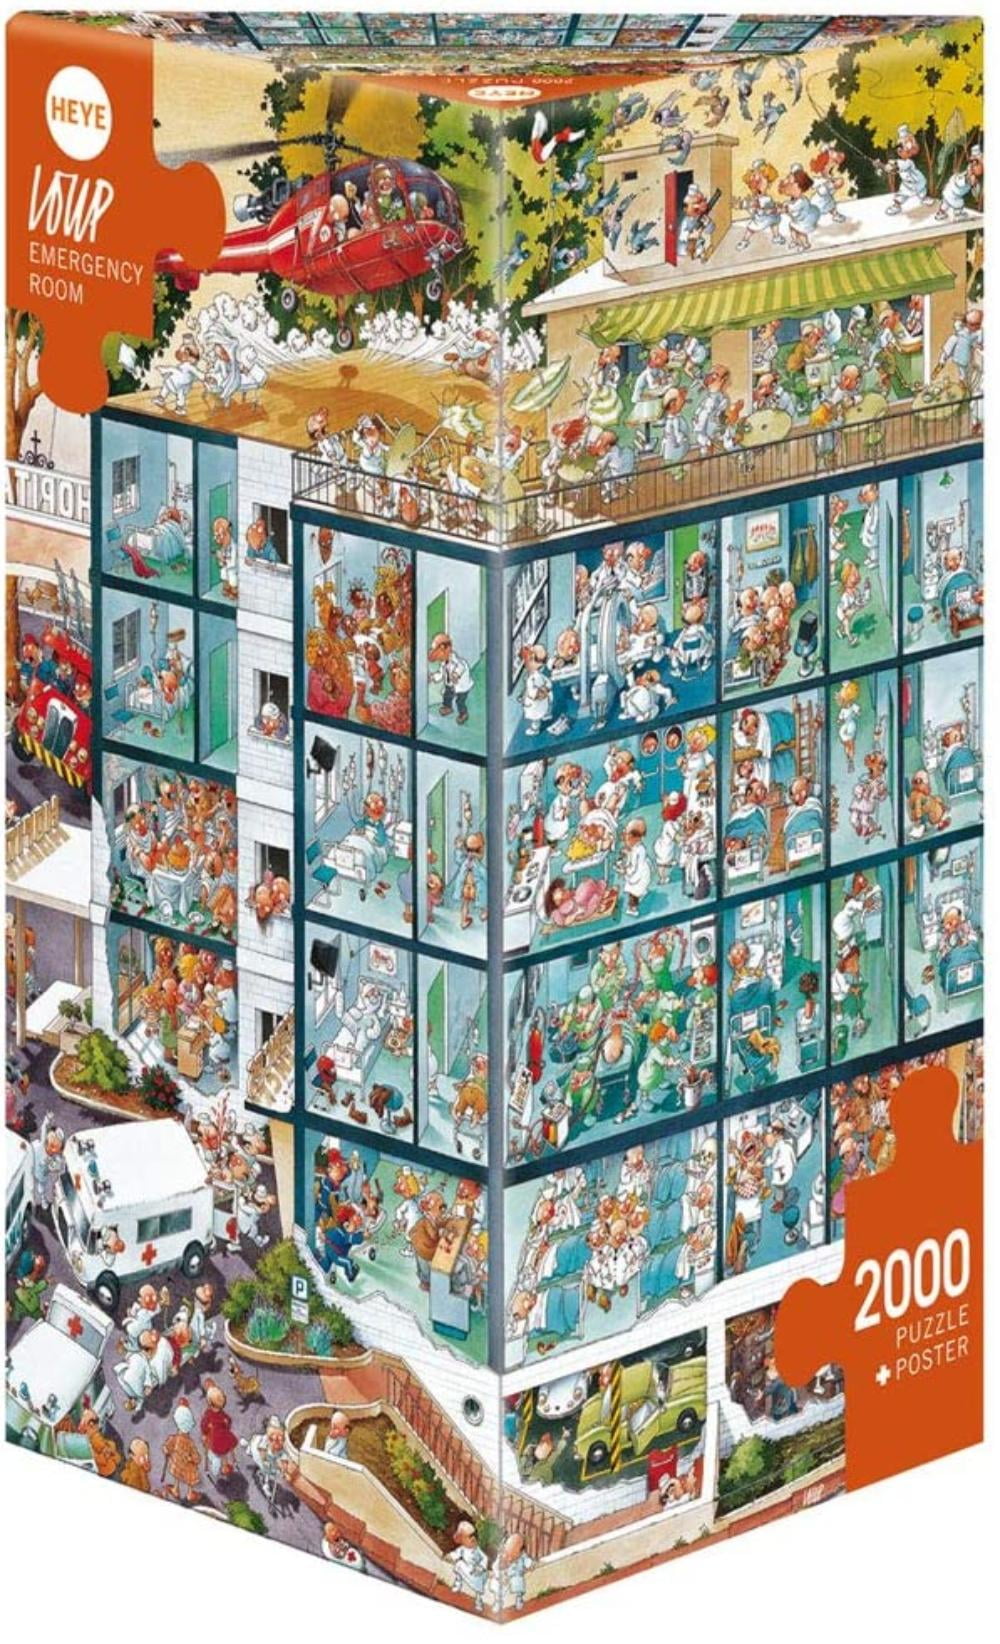 NEW Heye Jigsaw Puzzle 2000 Pieces Tiles "Emergency Room" by Jean-Jaques Loup 